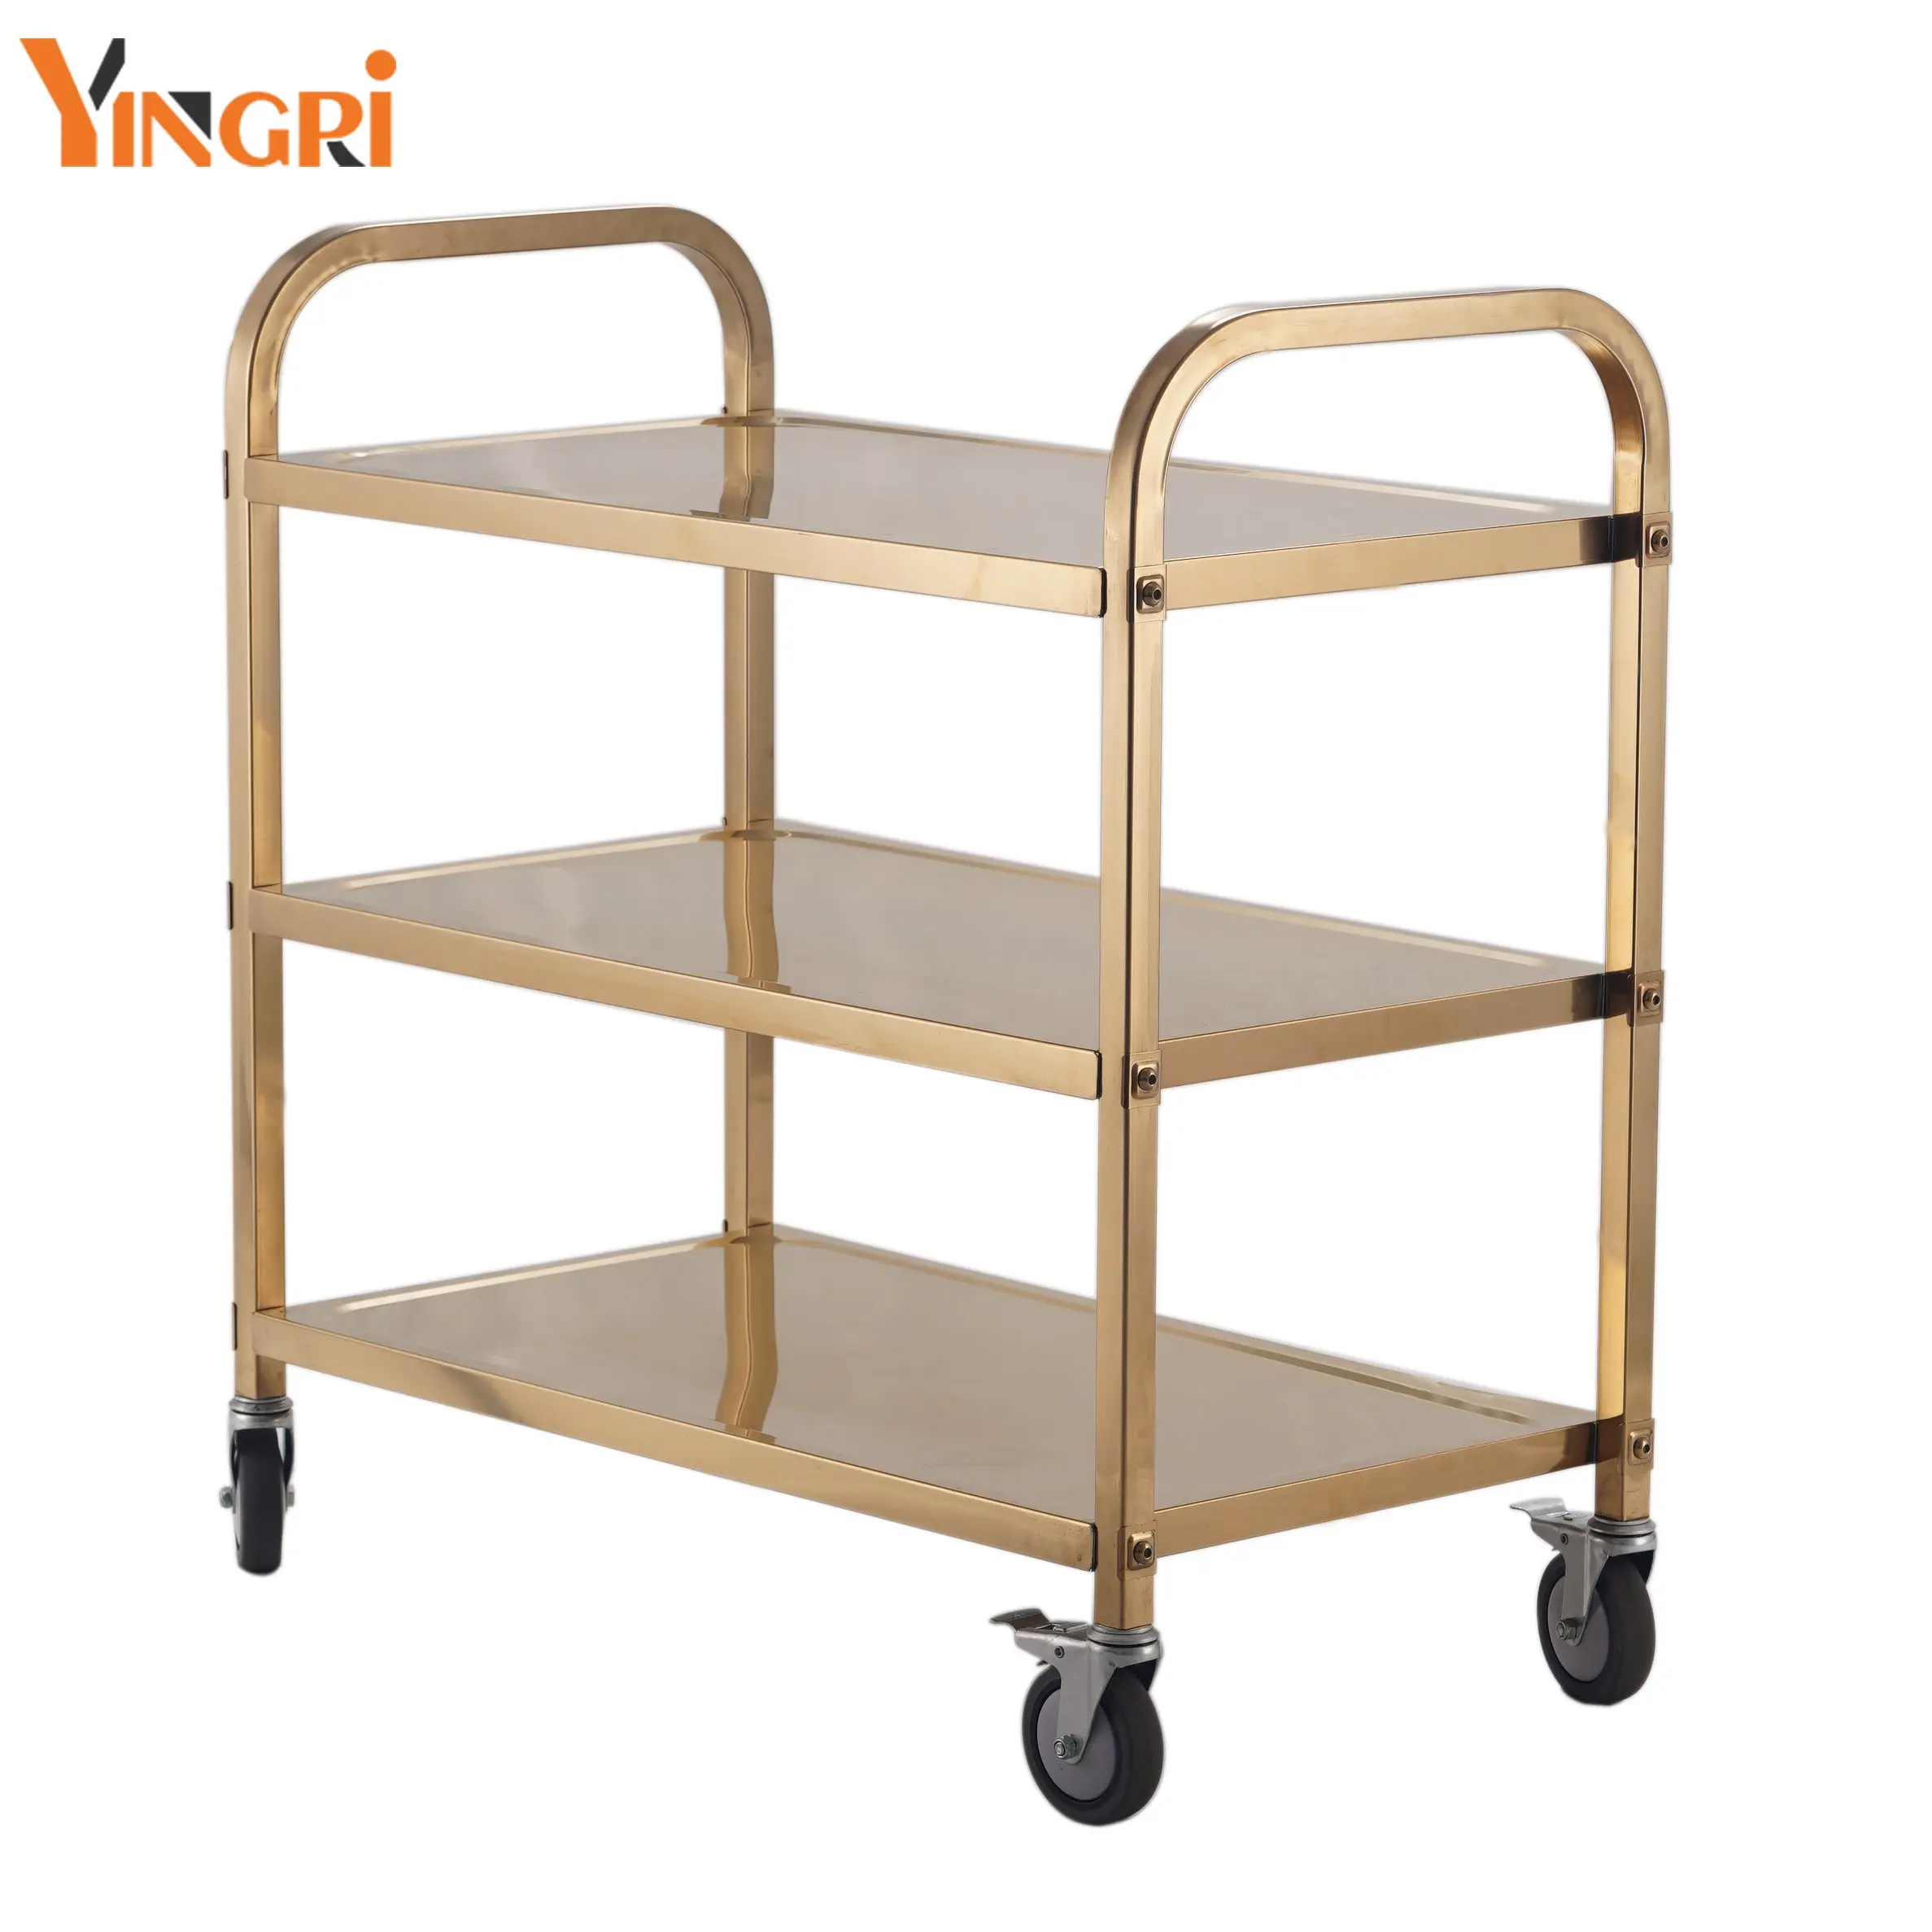 High quality Food and Beverage Stainless steel 3 Tiers Dining Cart Hotel Kitchen Trolley